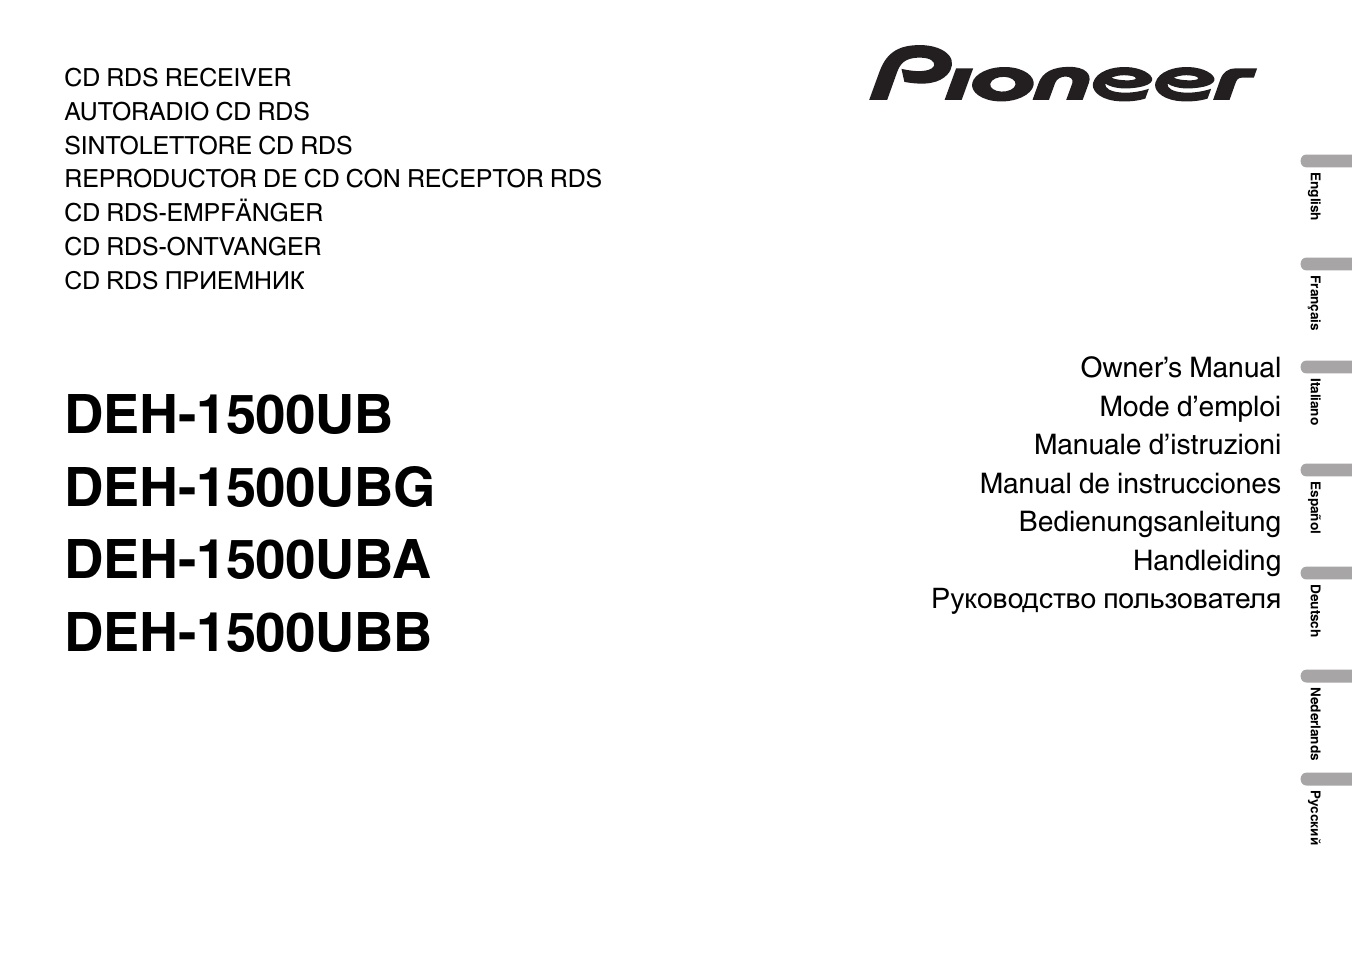 Pioneer DEH-1500UBG User Manual | 108 pages | Also for: DEH-1500UBB, DEH- 1500UB, DEH-1500UBA